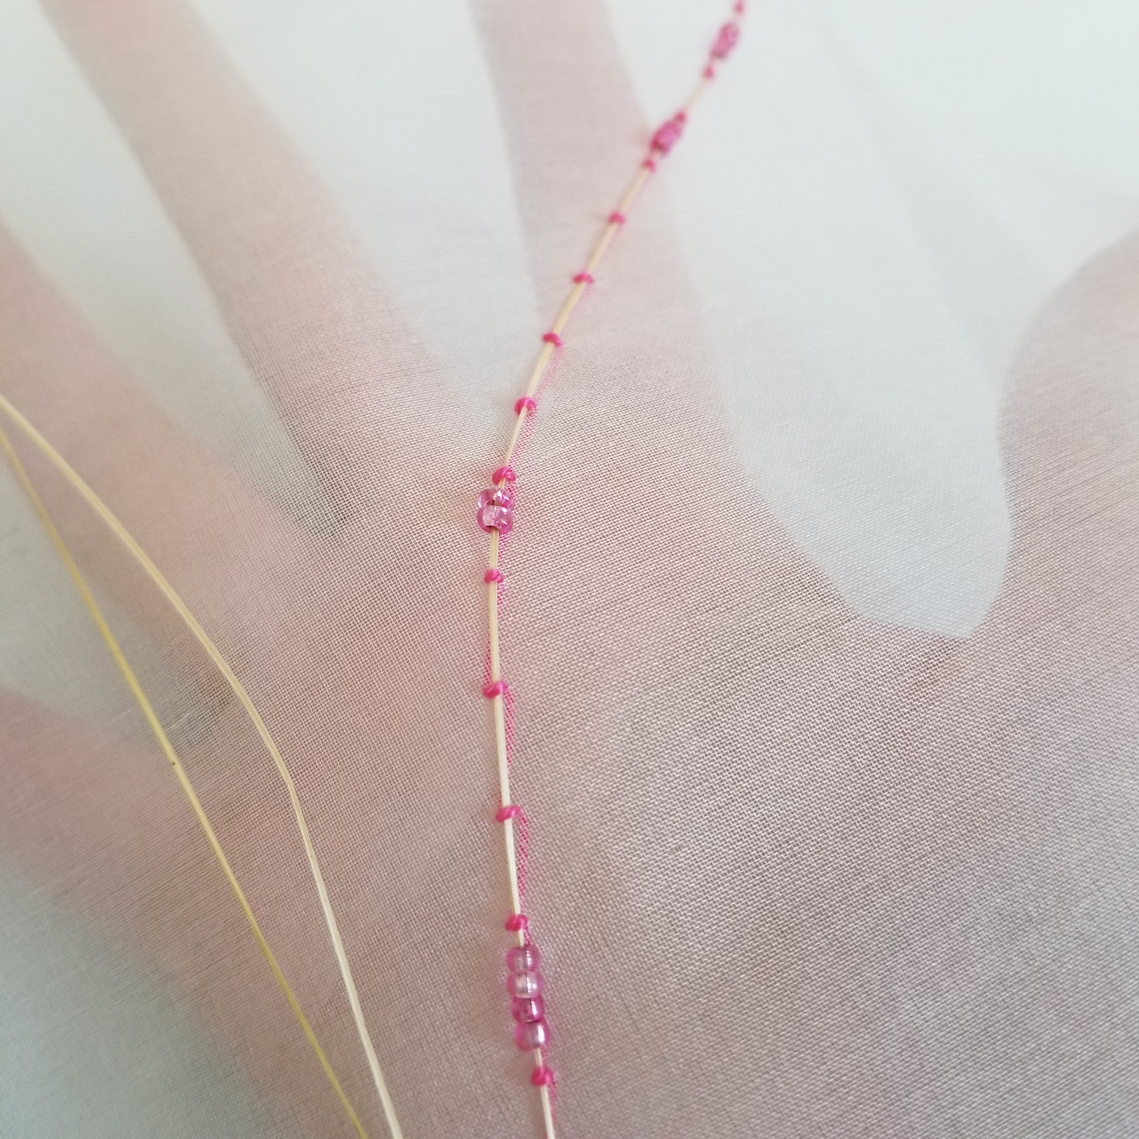 Organza fabric with my hand behind it so you can visualize the transparency. Three dried grass blades on top with one couched onto the fabric with thick pink thread and pink glass beads